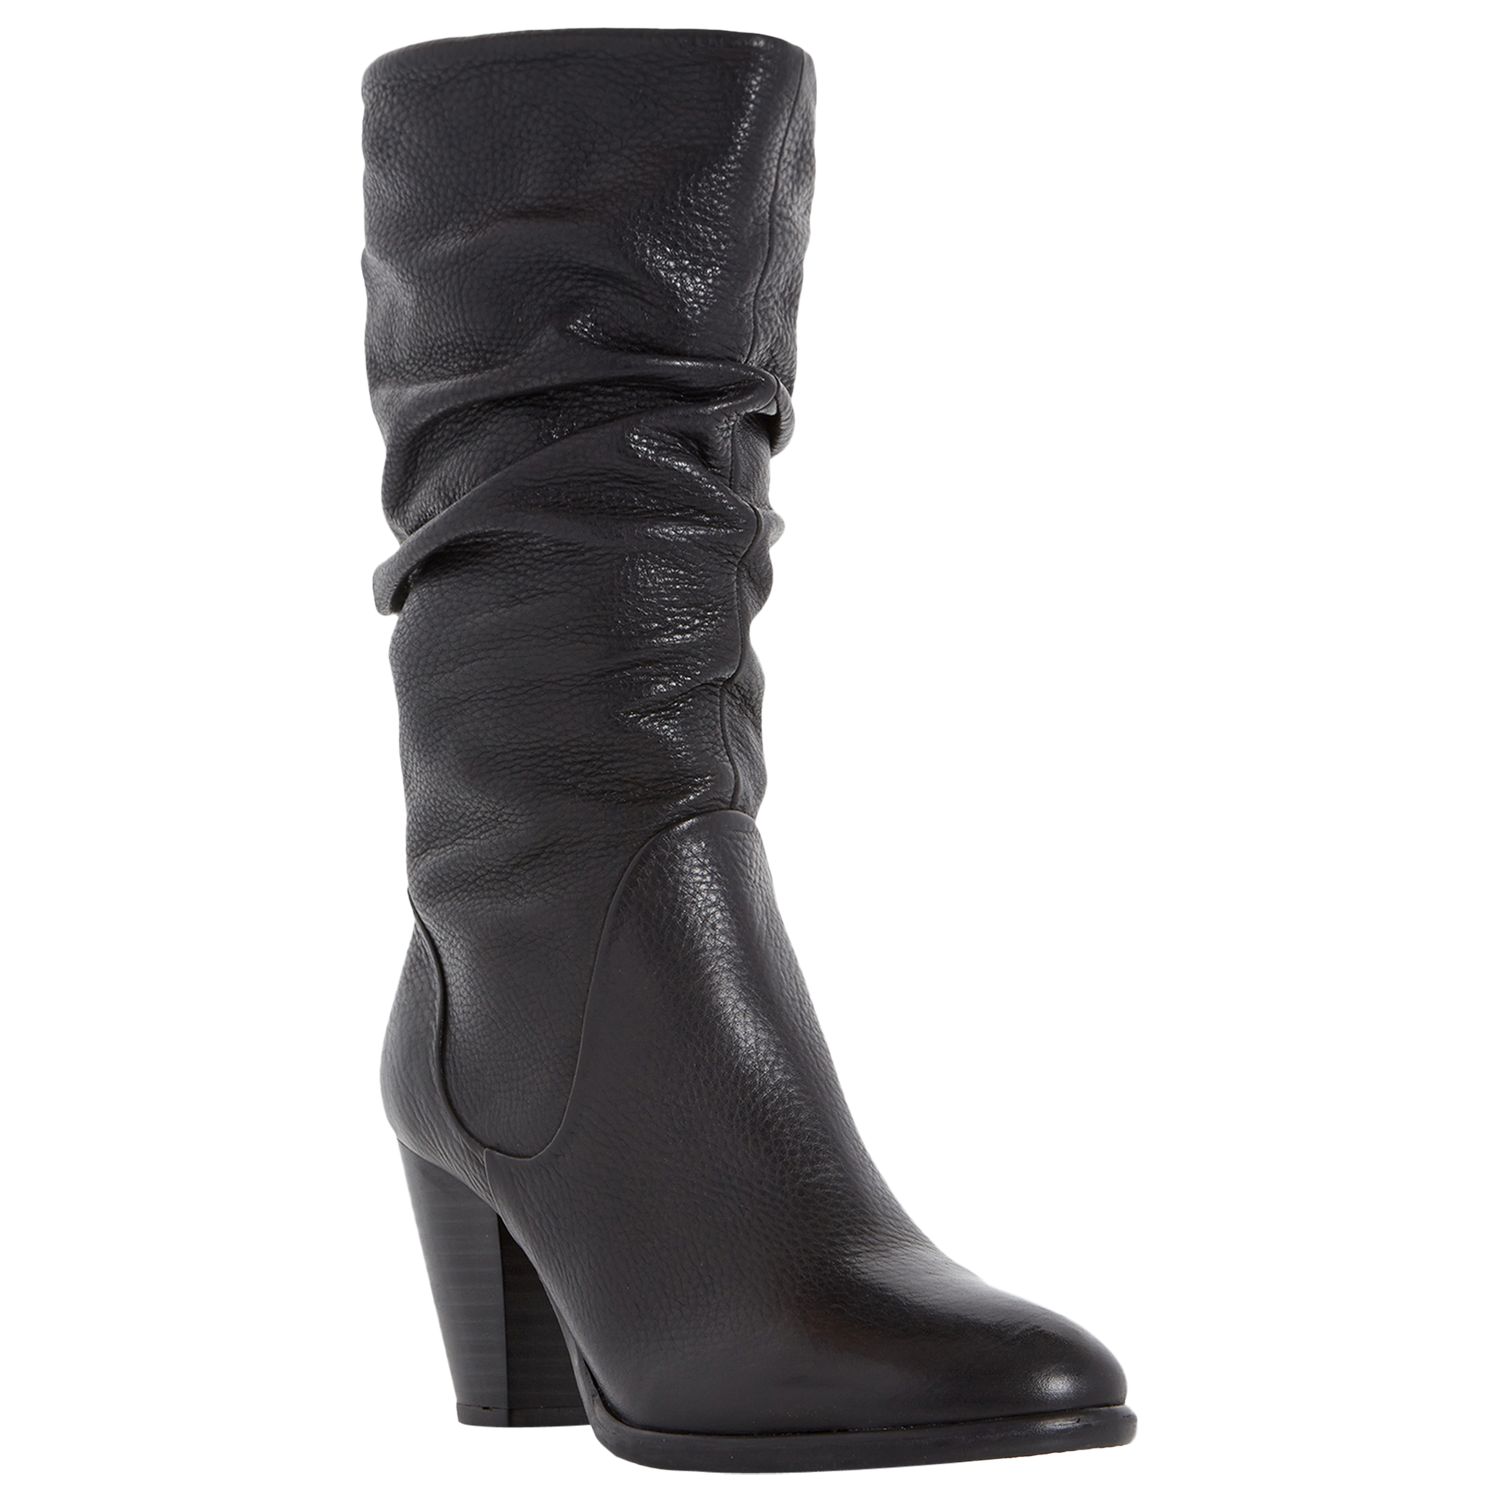 Dune Rossy Slouch Calf Boots, Black